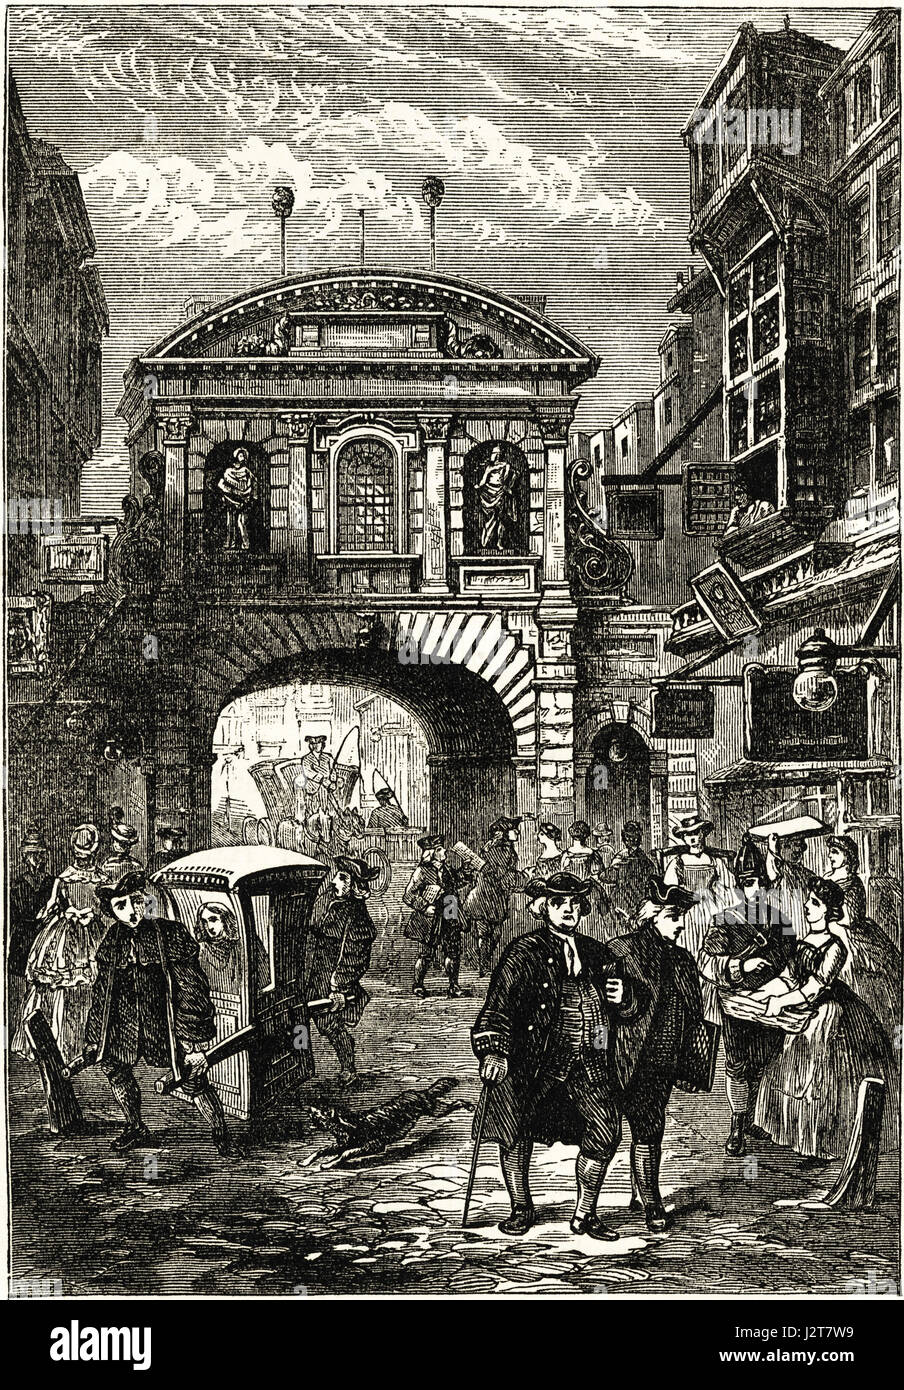 Temple Bar Gateway, London at the time of Dr Samuel Johnson in the 18th century. Victorian engraving circa 1880. Stock Photo